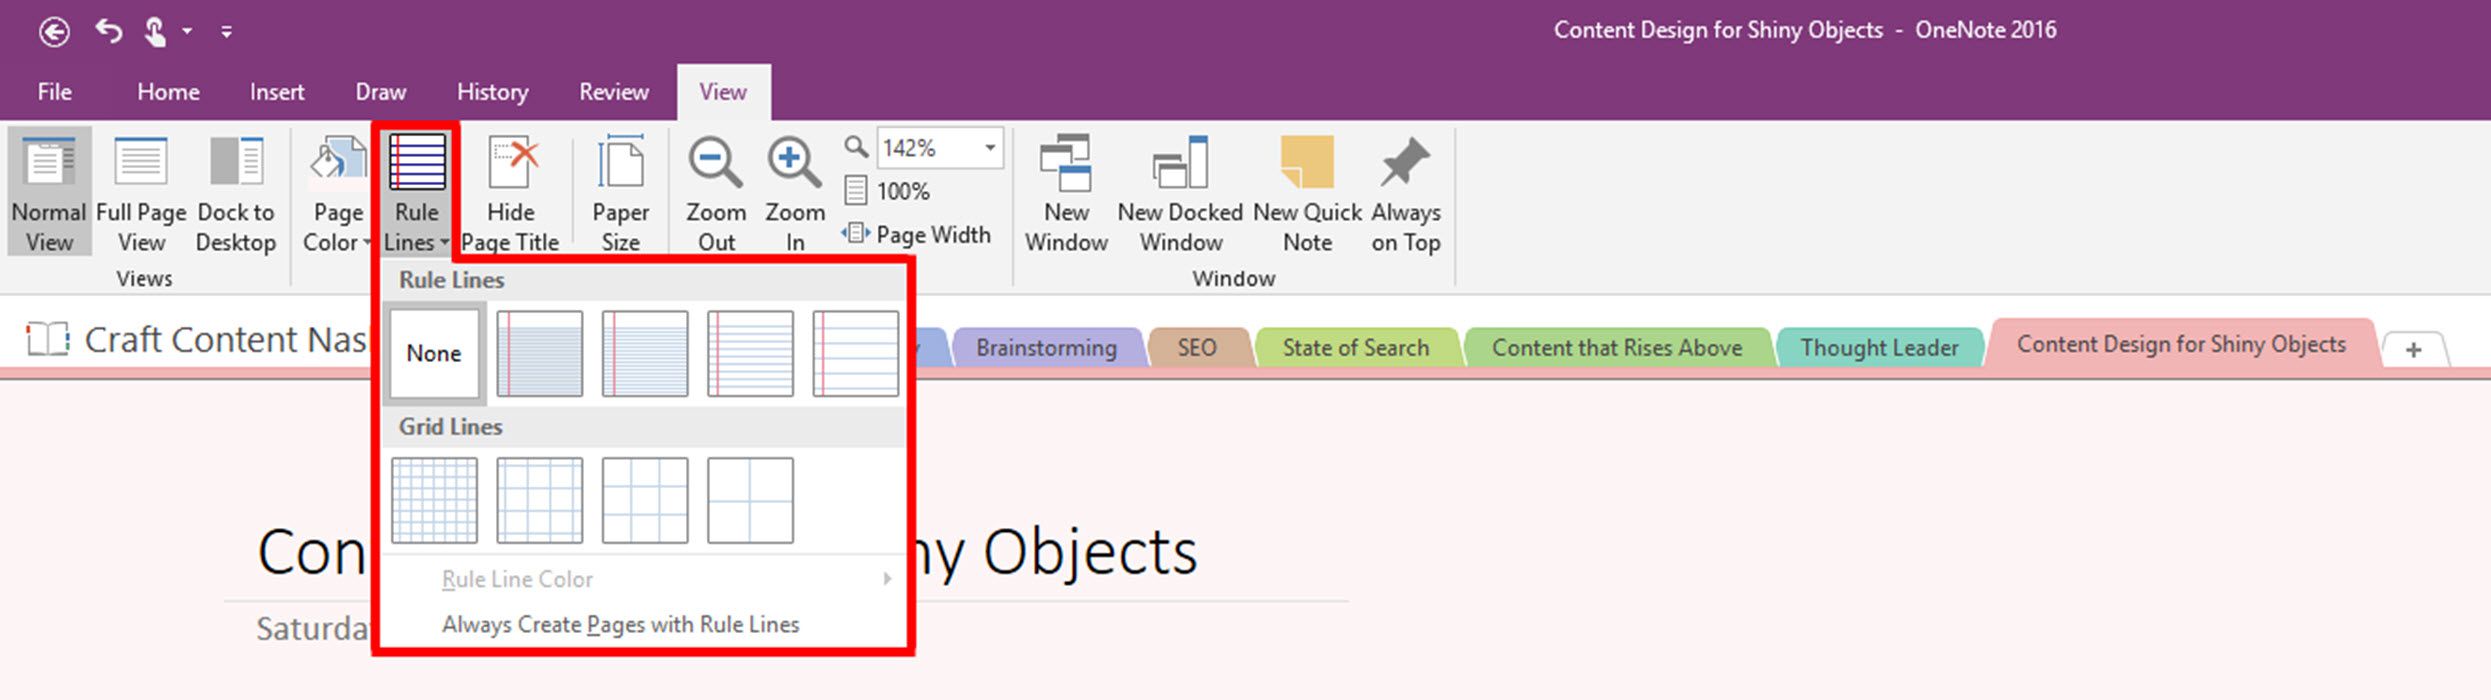 finding onenote 2016 download